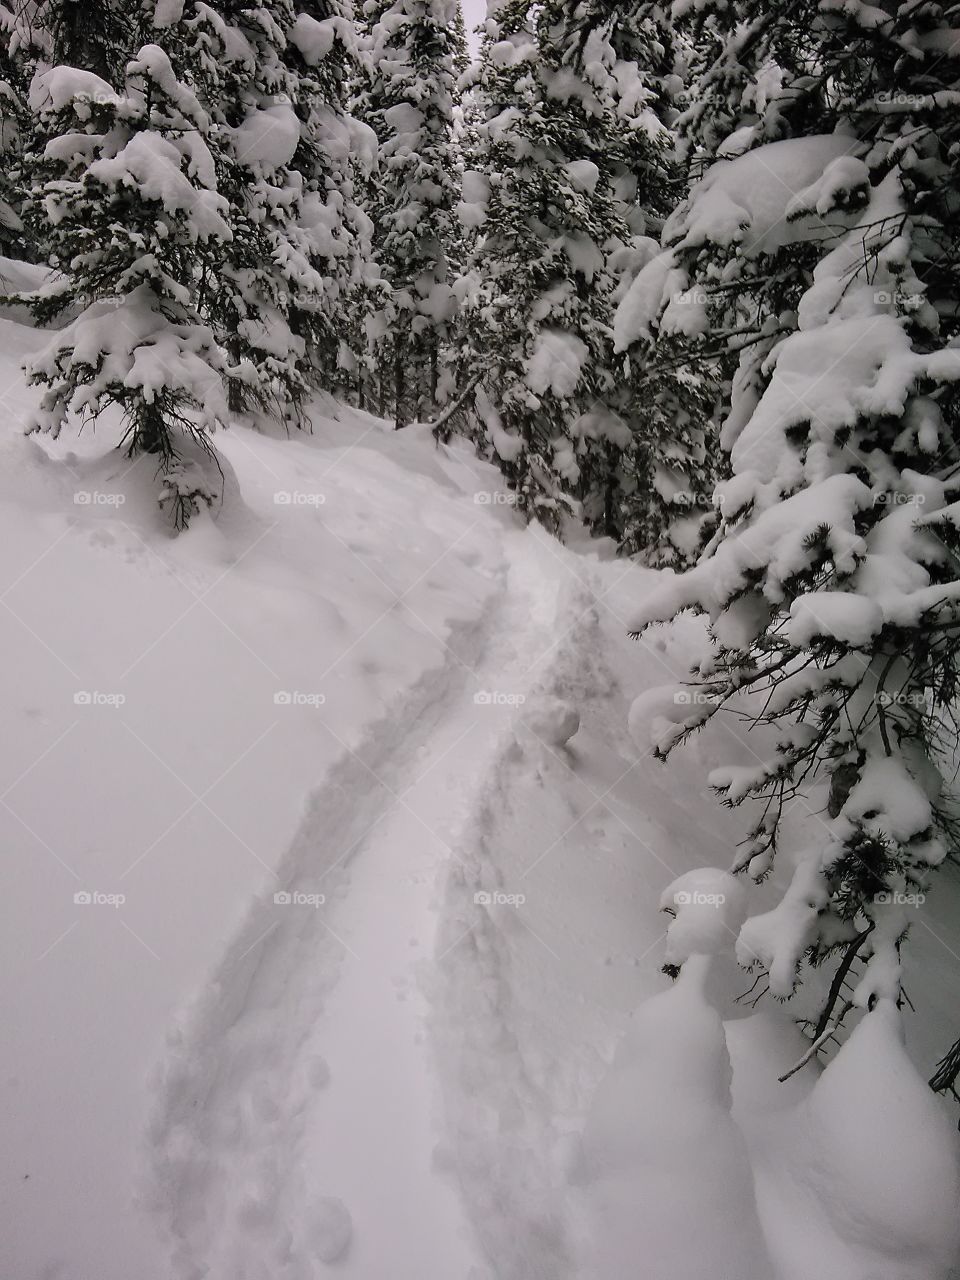 Fresh Lines. Great shot of some great pow, look how deep it was that day!